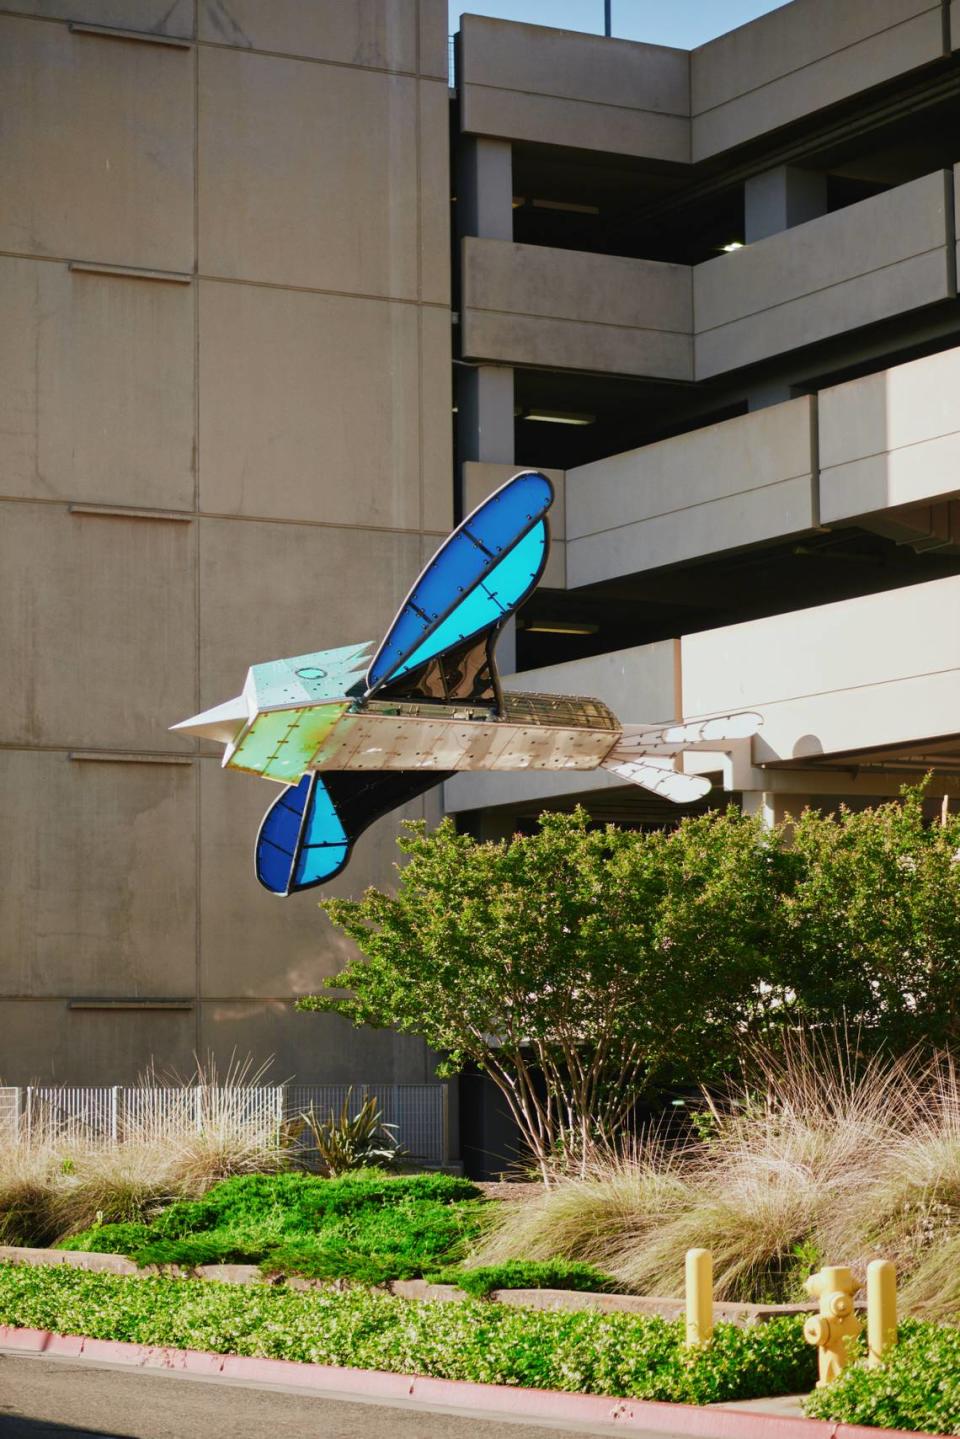 “Flying Gardens” by Dennis Oppenheim features a series of bird sculptures mounted to the facade of the Sacramento International Aiport parking garage.